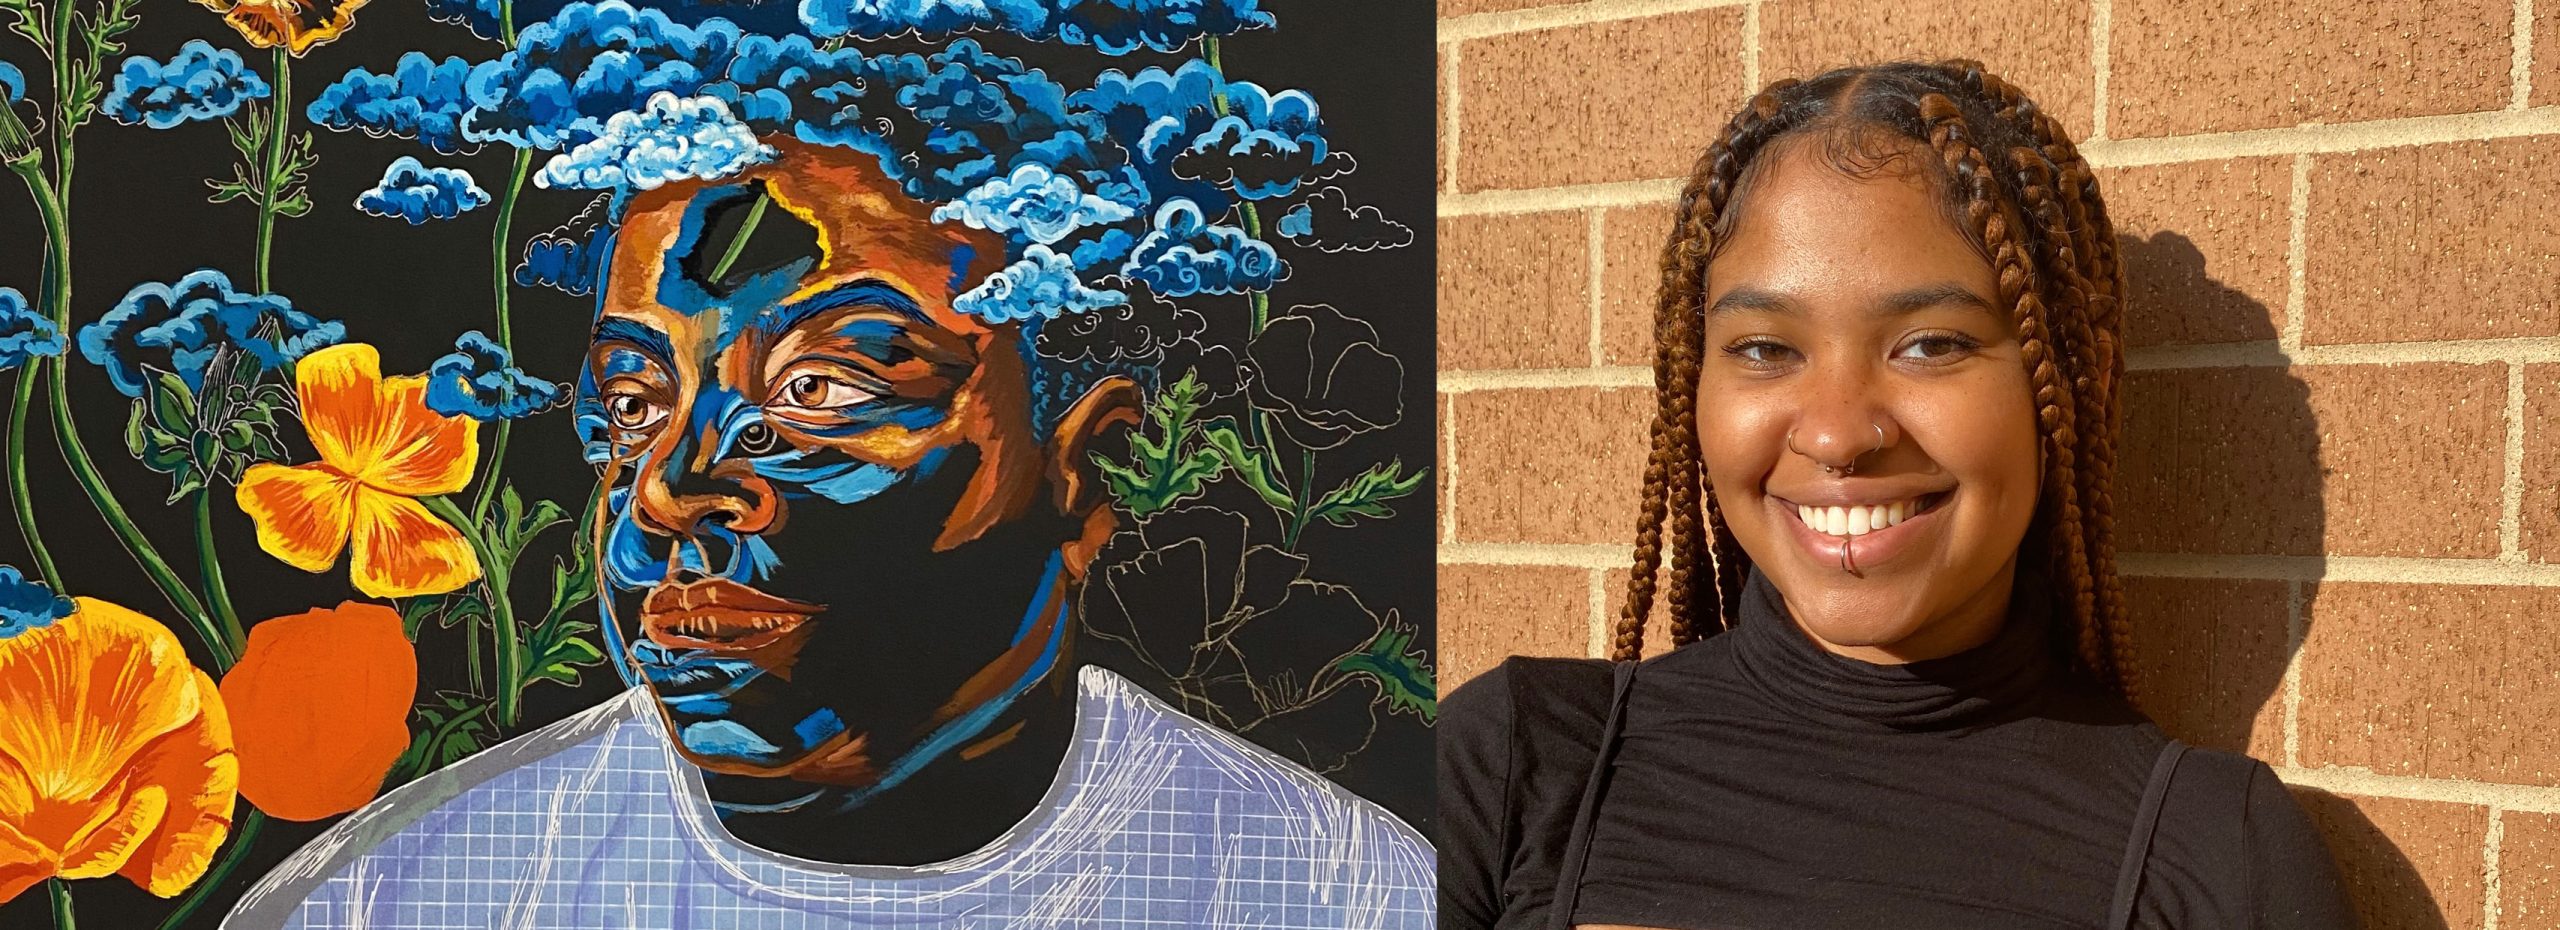 A colorful painting of a Black man surrounded by flowers next to a photograph of the Black female artist standing by a brick wall